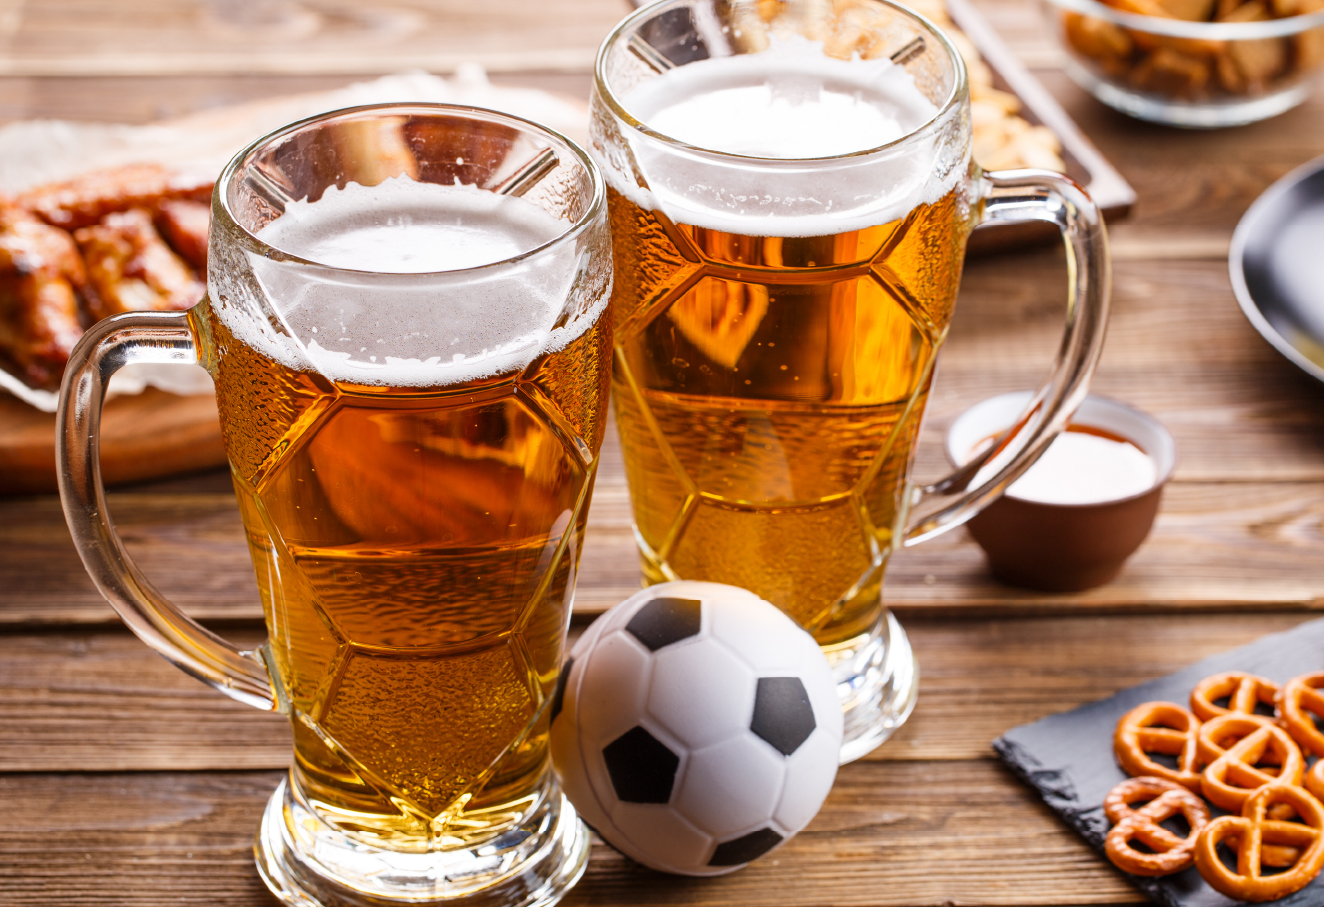 The photo shows two cups of beer with a mini football plushie in front.